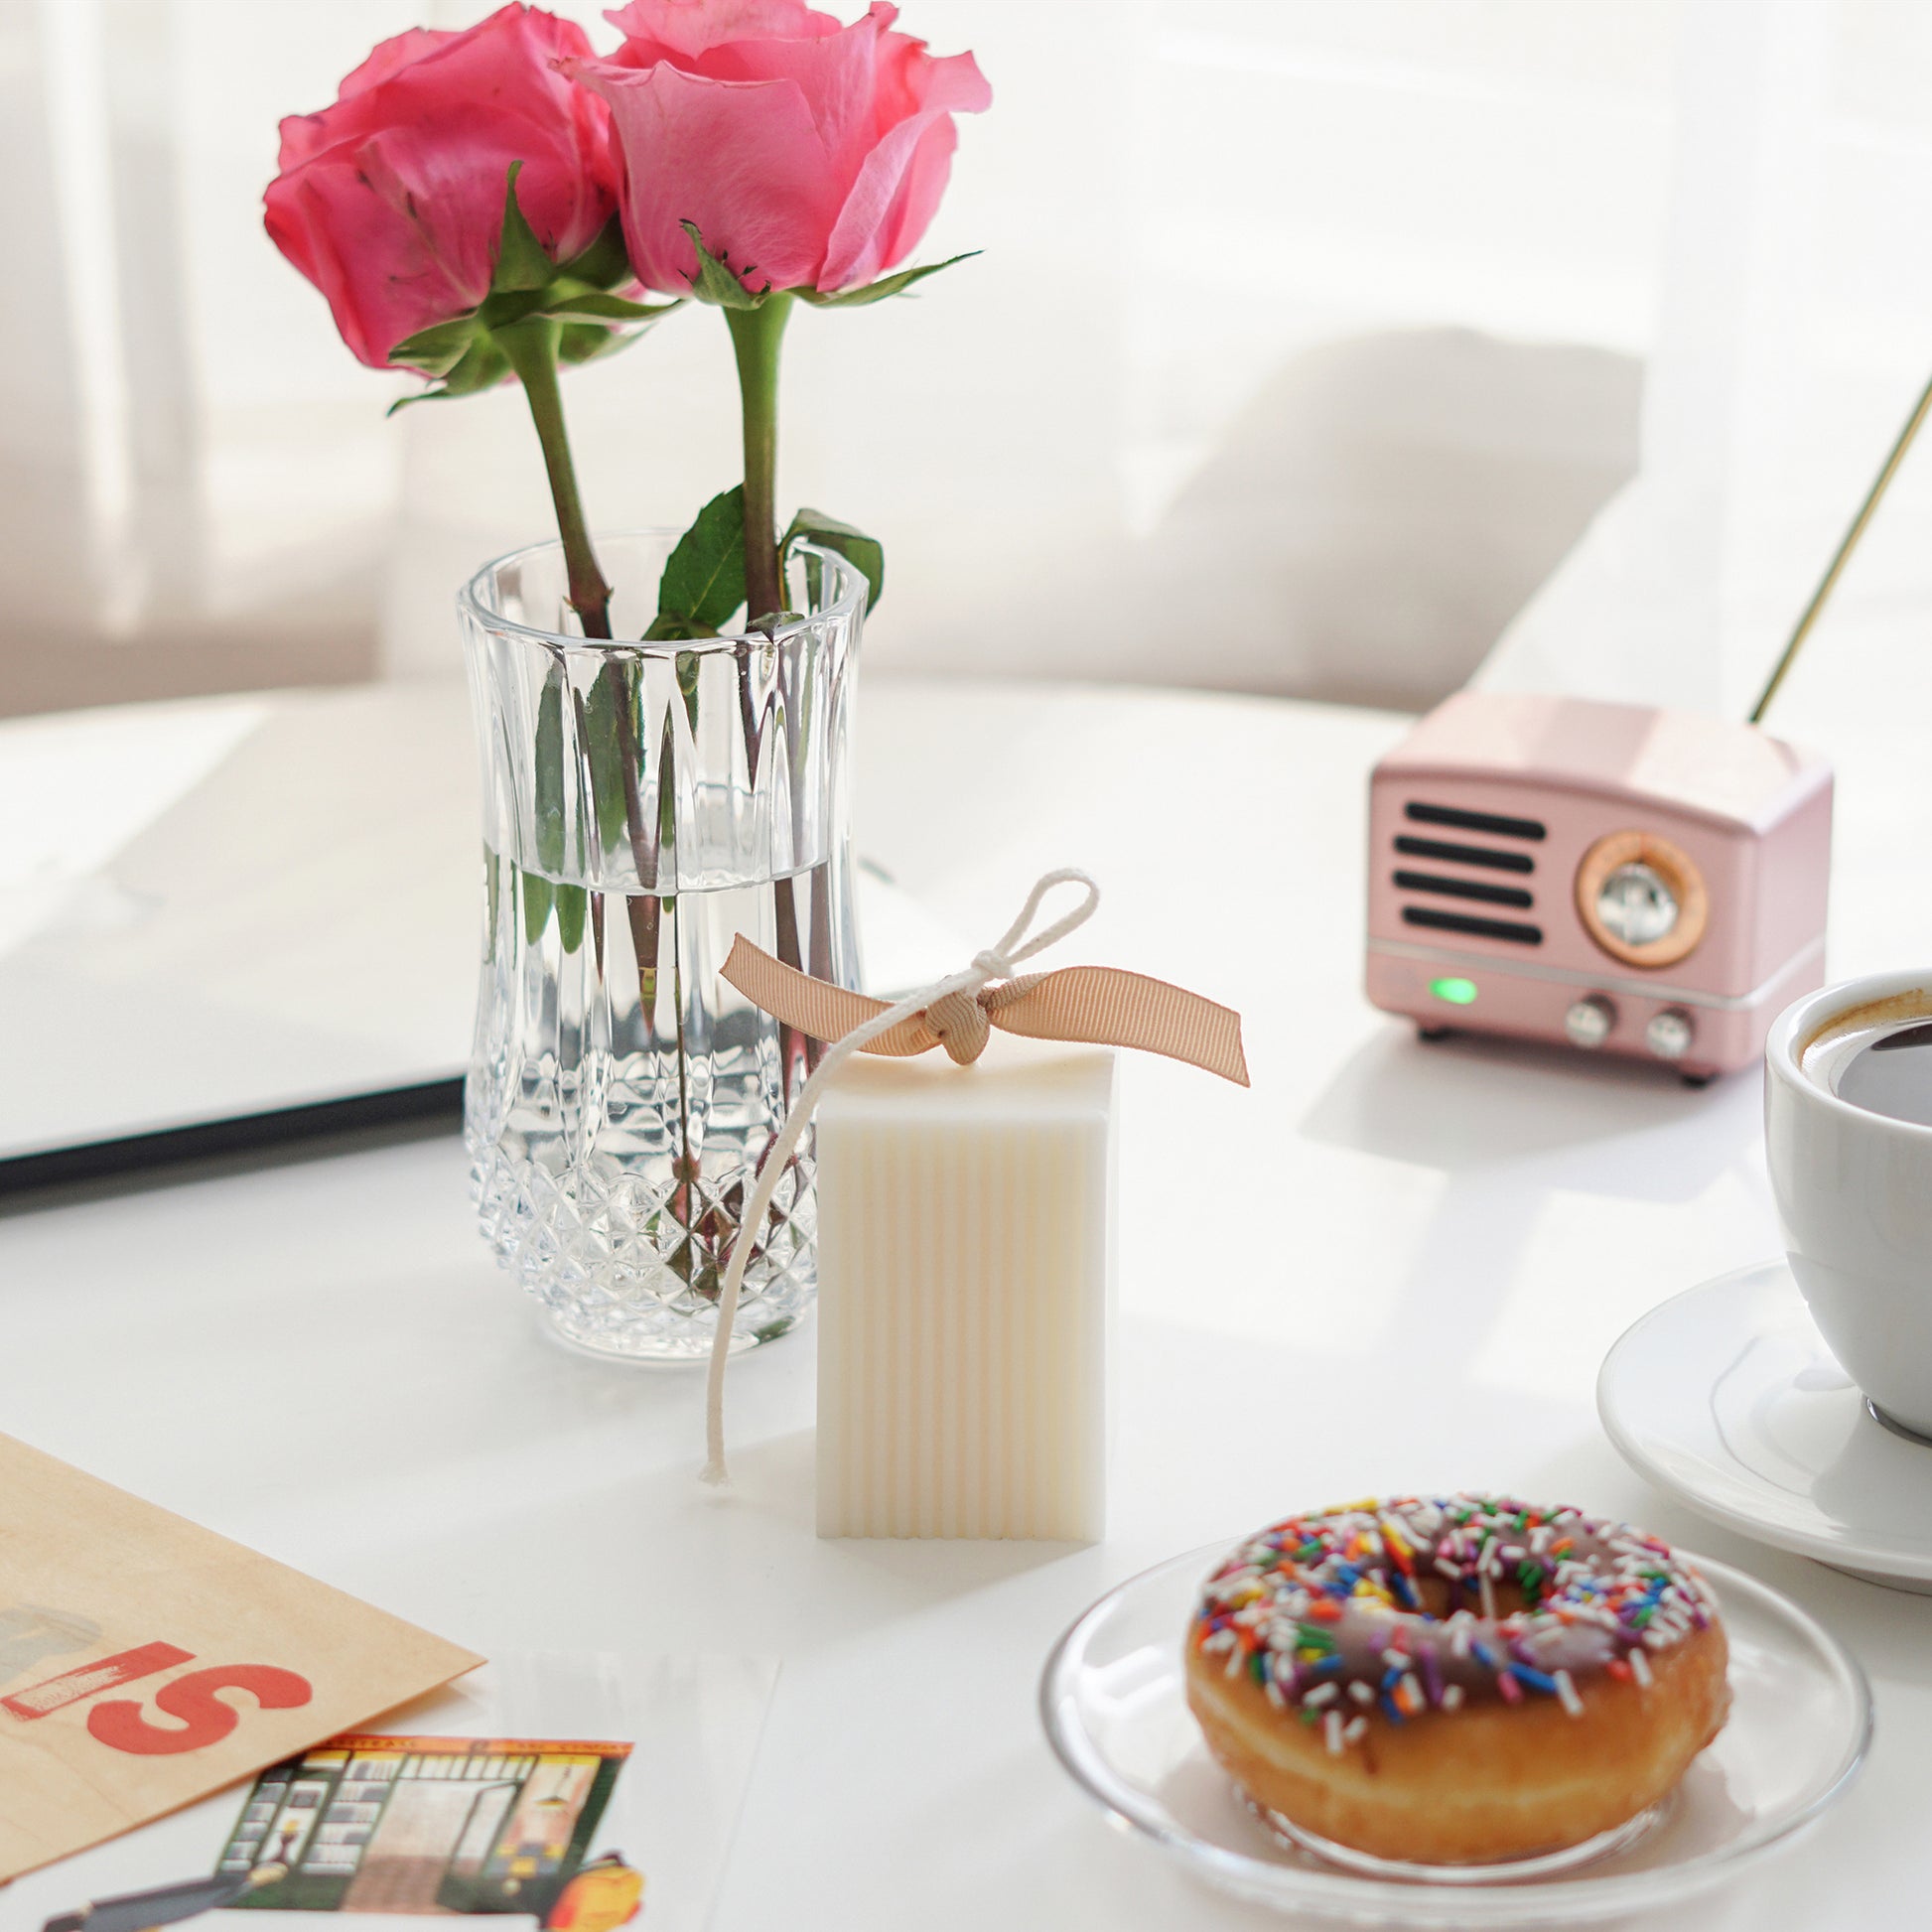 pink roses in a glass, ribbed rectangular white soy pillar candle, chocolate sprinkle donut on a clear plate, cup of coffee in a illy mug, pink mini speaker, paris wooden postcard, macbook on white round table